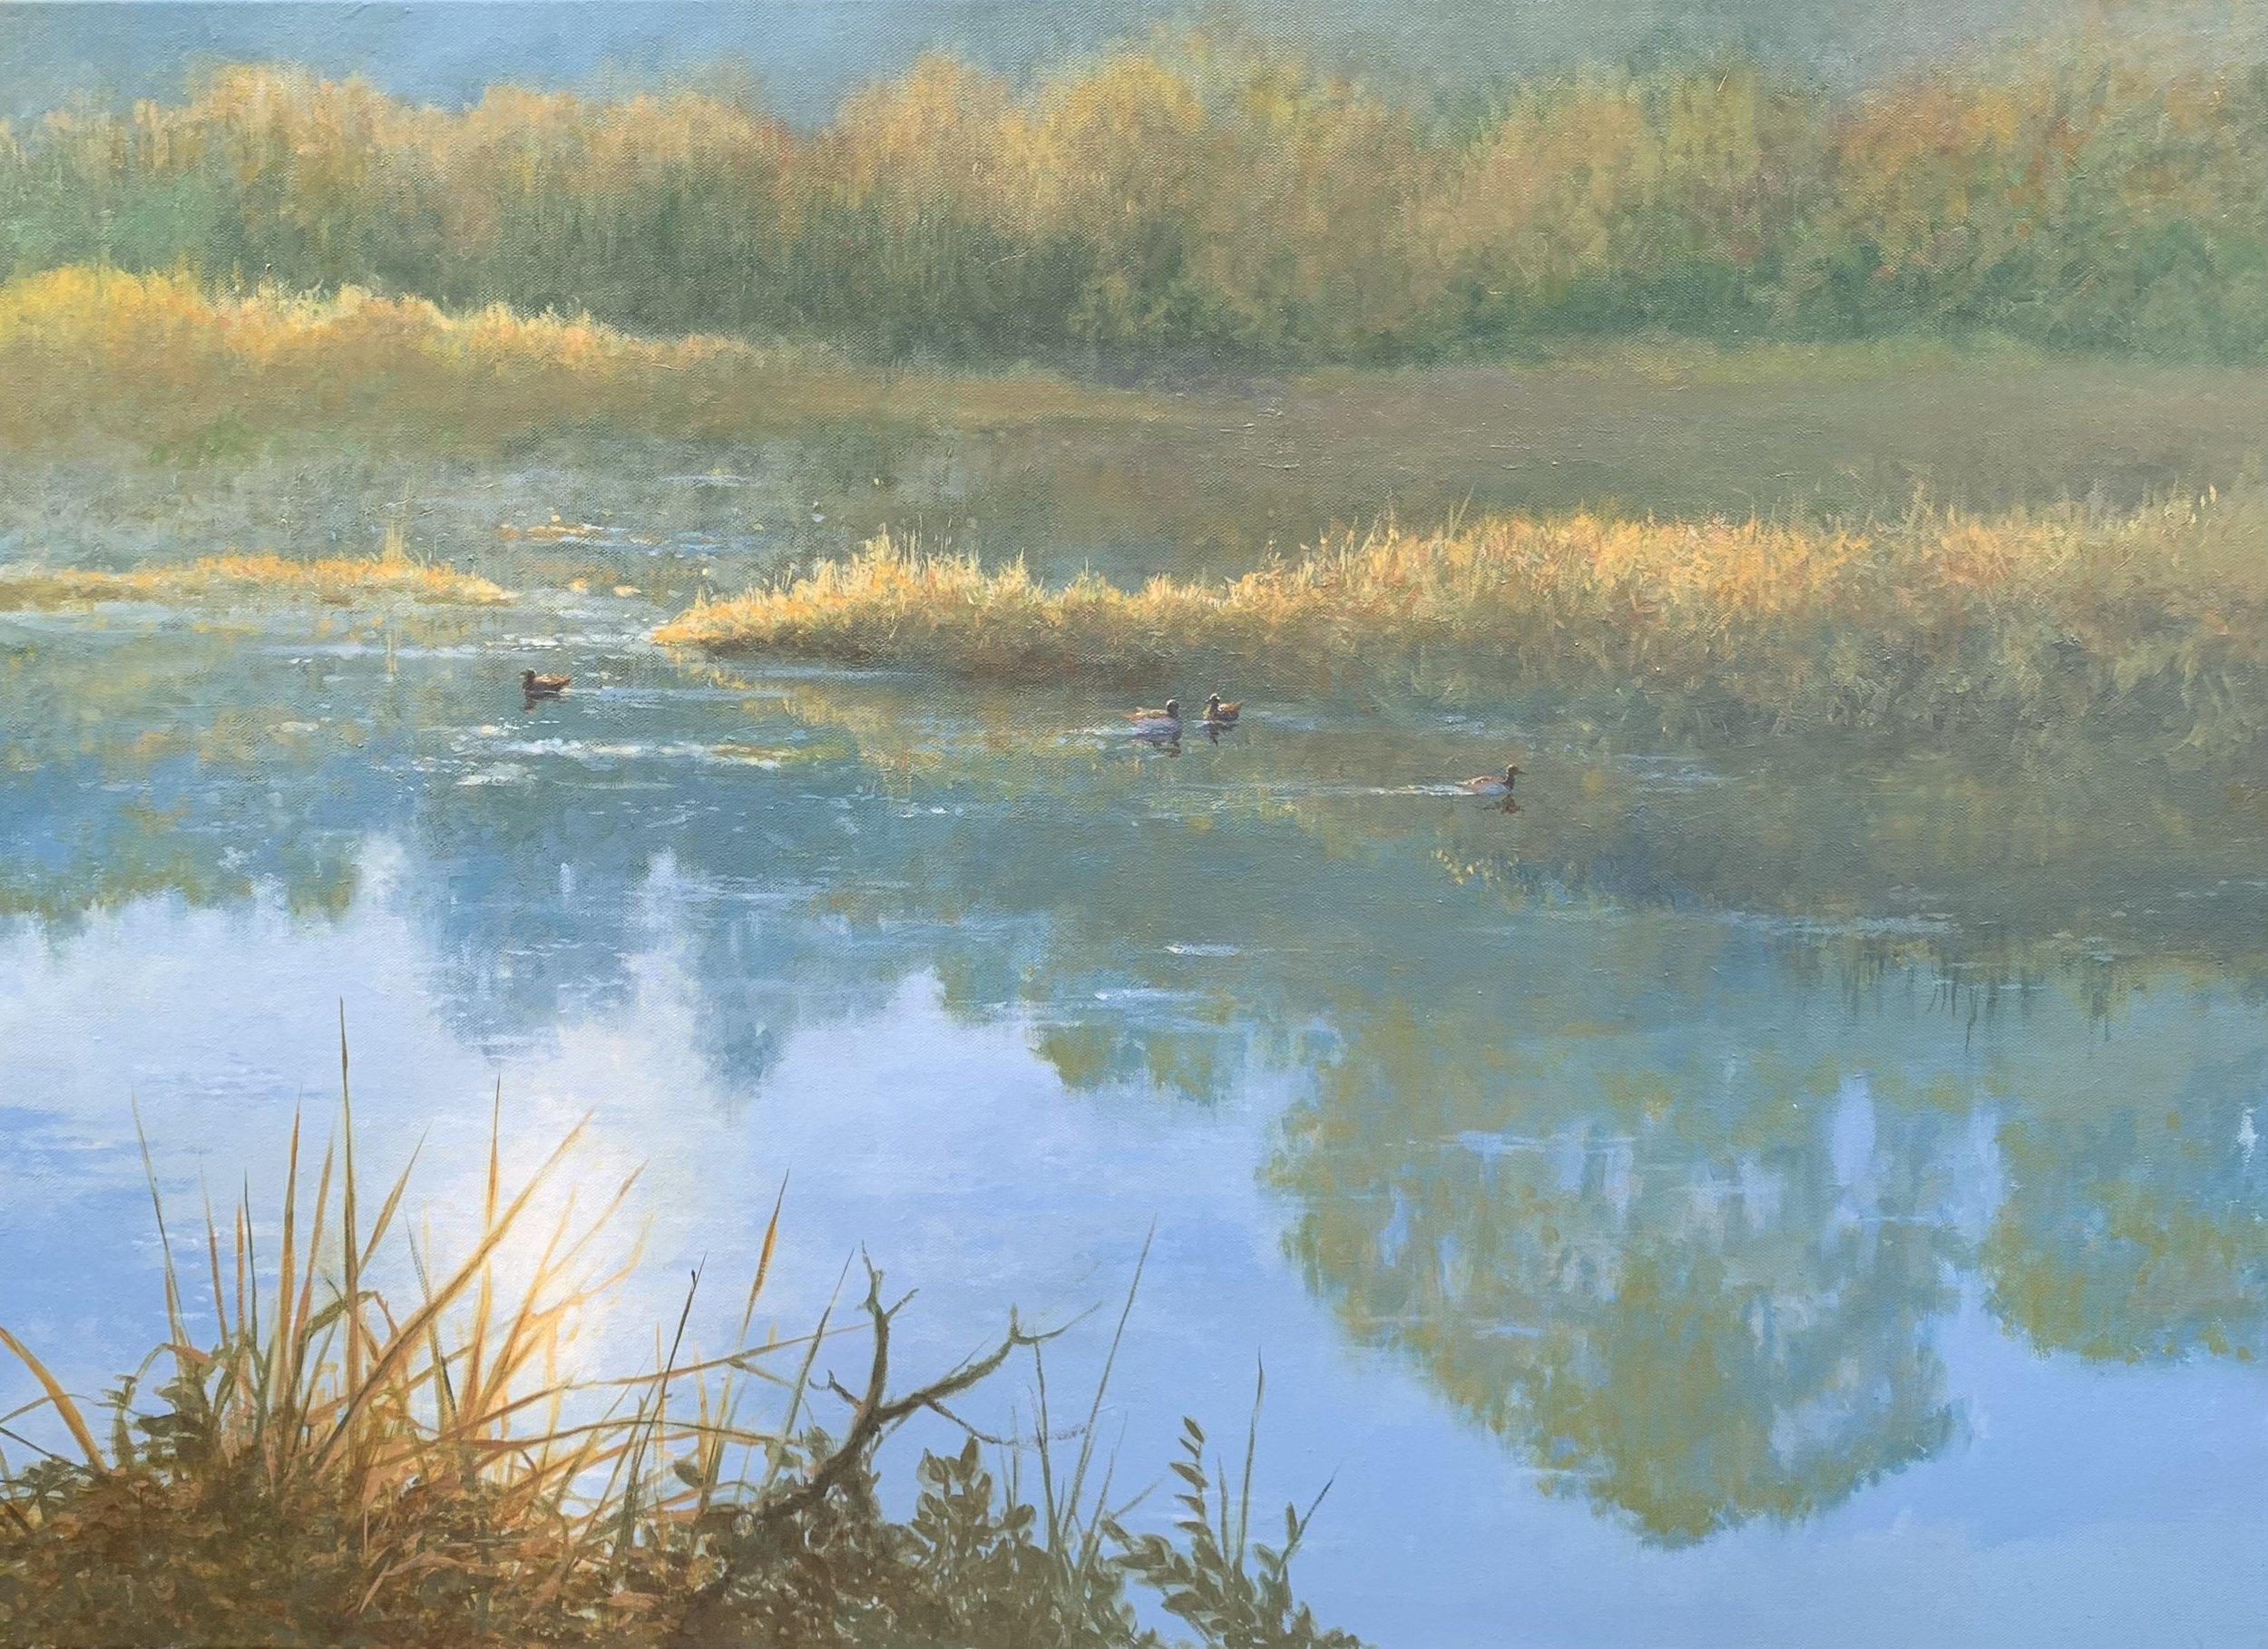 This piece, "Evening Waters" is a 23x33" oil painting on canvas by artist Adrian Rigby. Featured is a solitary pond with reflection's of a late afternoon sun beaming off of the surface. Tangles of grass and vine surround the quiet ecosystem as a